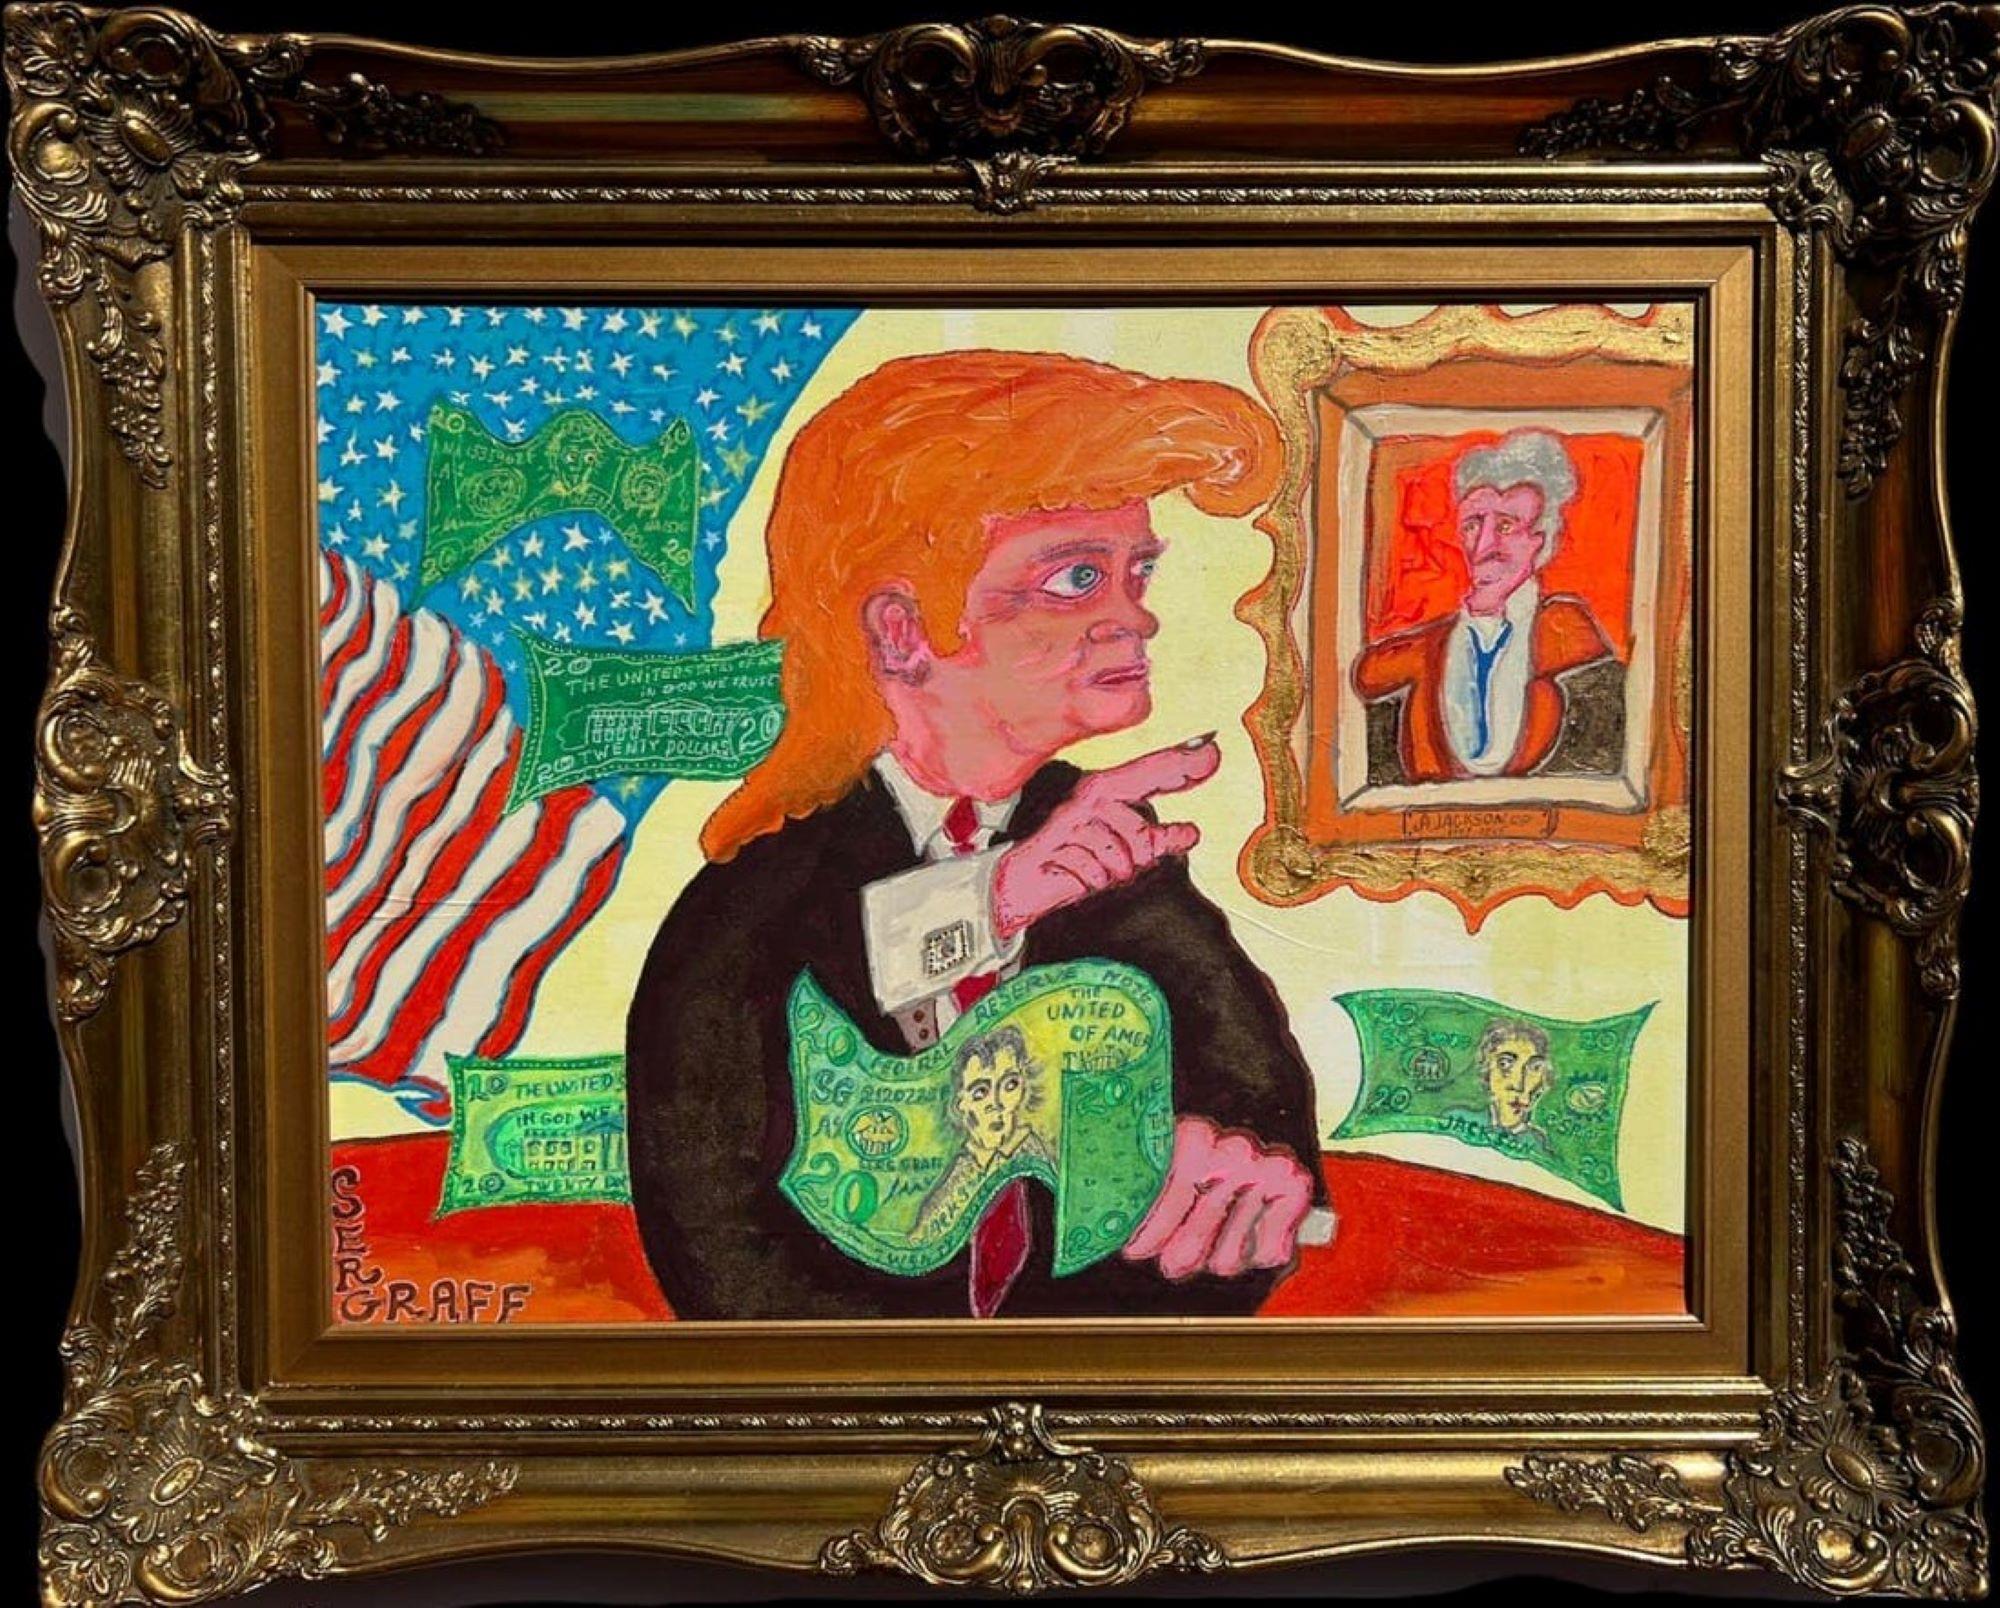 This is a rare unique original acrylic/oil painting on canvas in a naive primitivism style depicting Donald Trump sitting at a table, with a portrait of Jackson in the background. Titled "Trump&Jackson Lucky Money"

Some small details of the